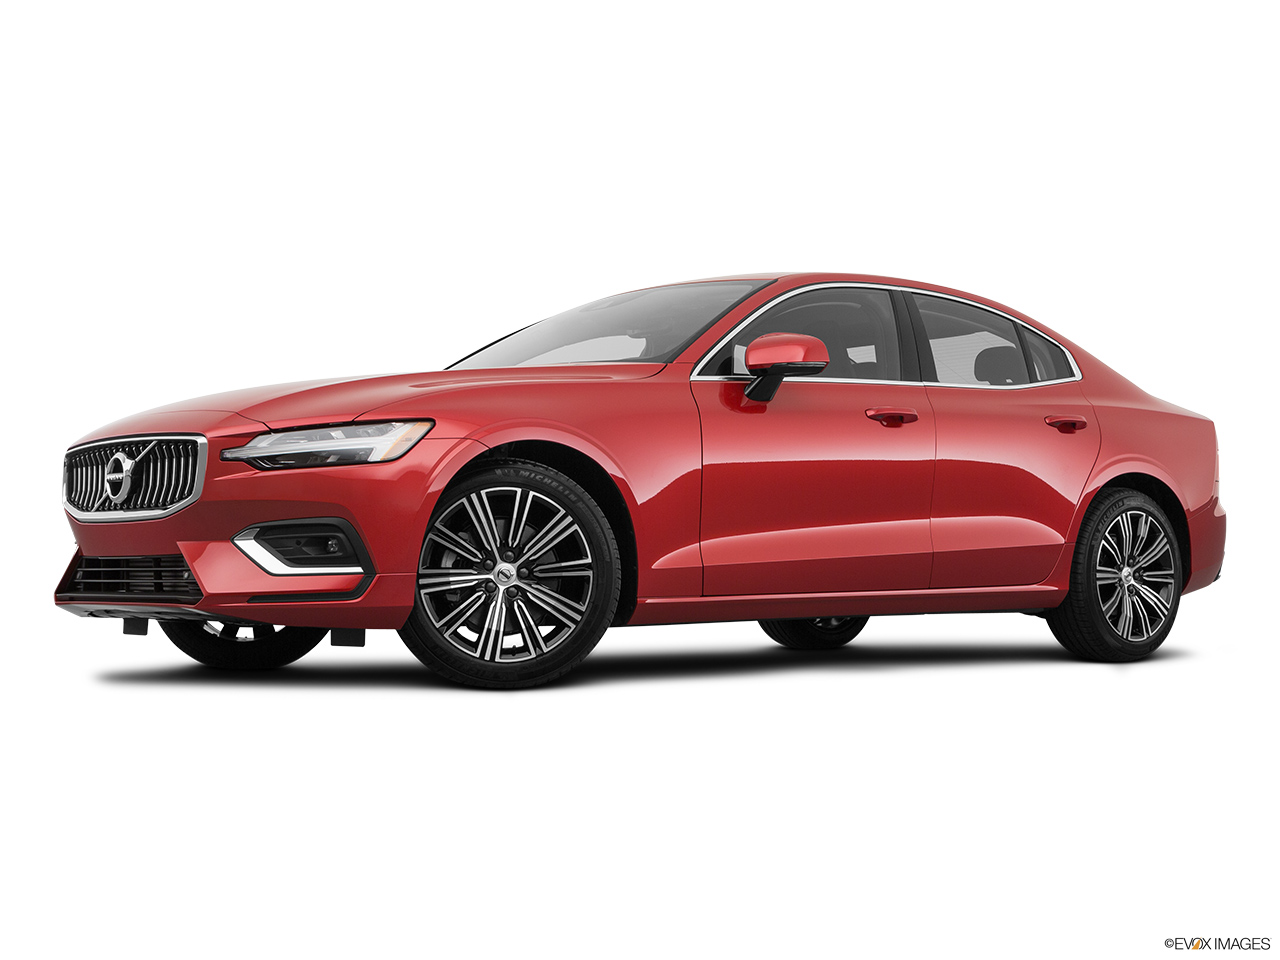 2020 Volvo S60 T5 Inscription Low/wide front 5/8. 